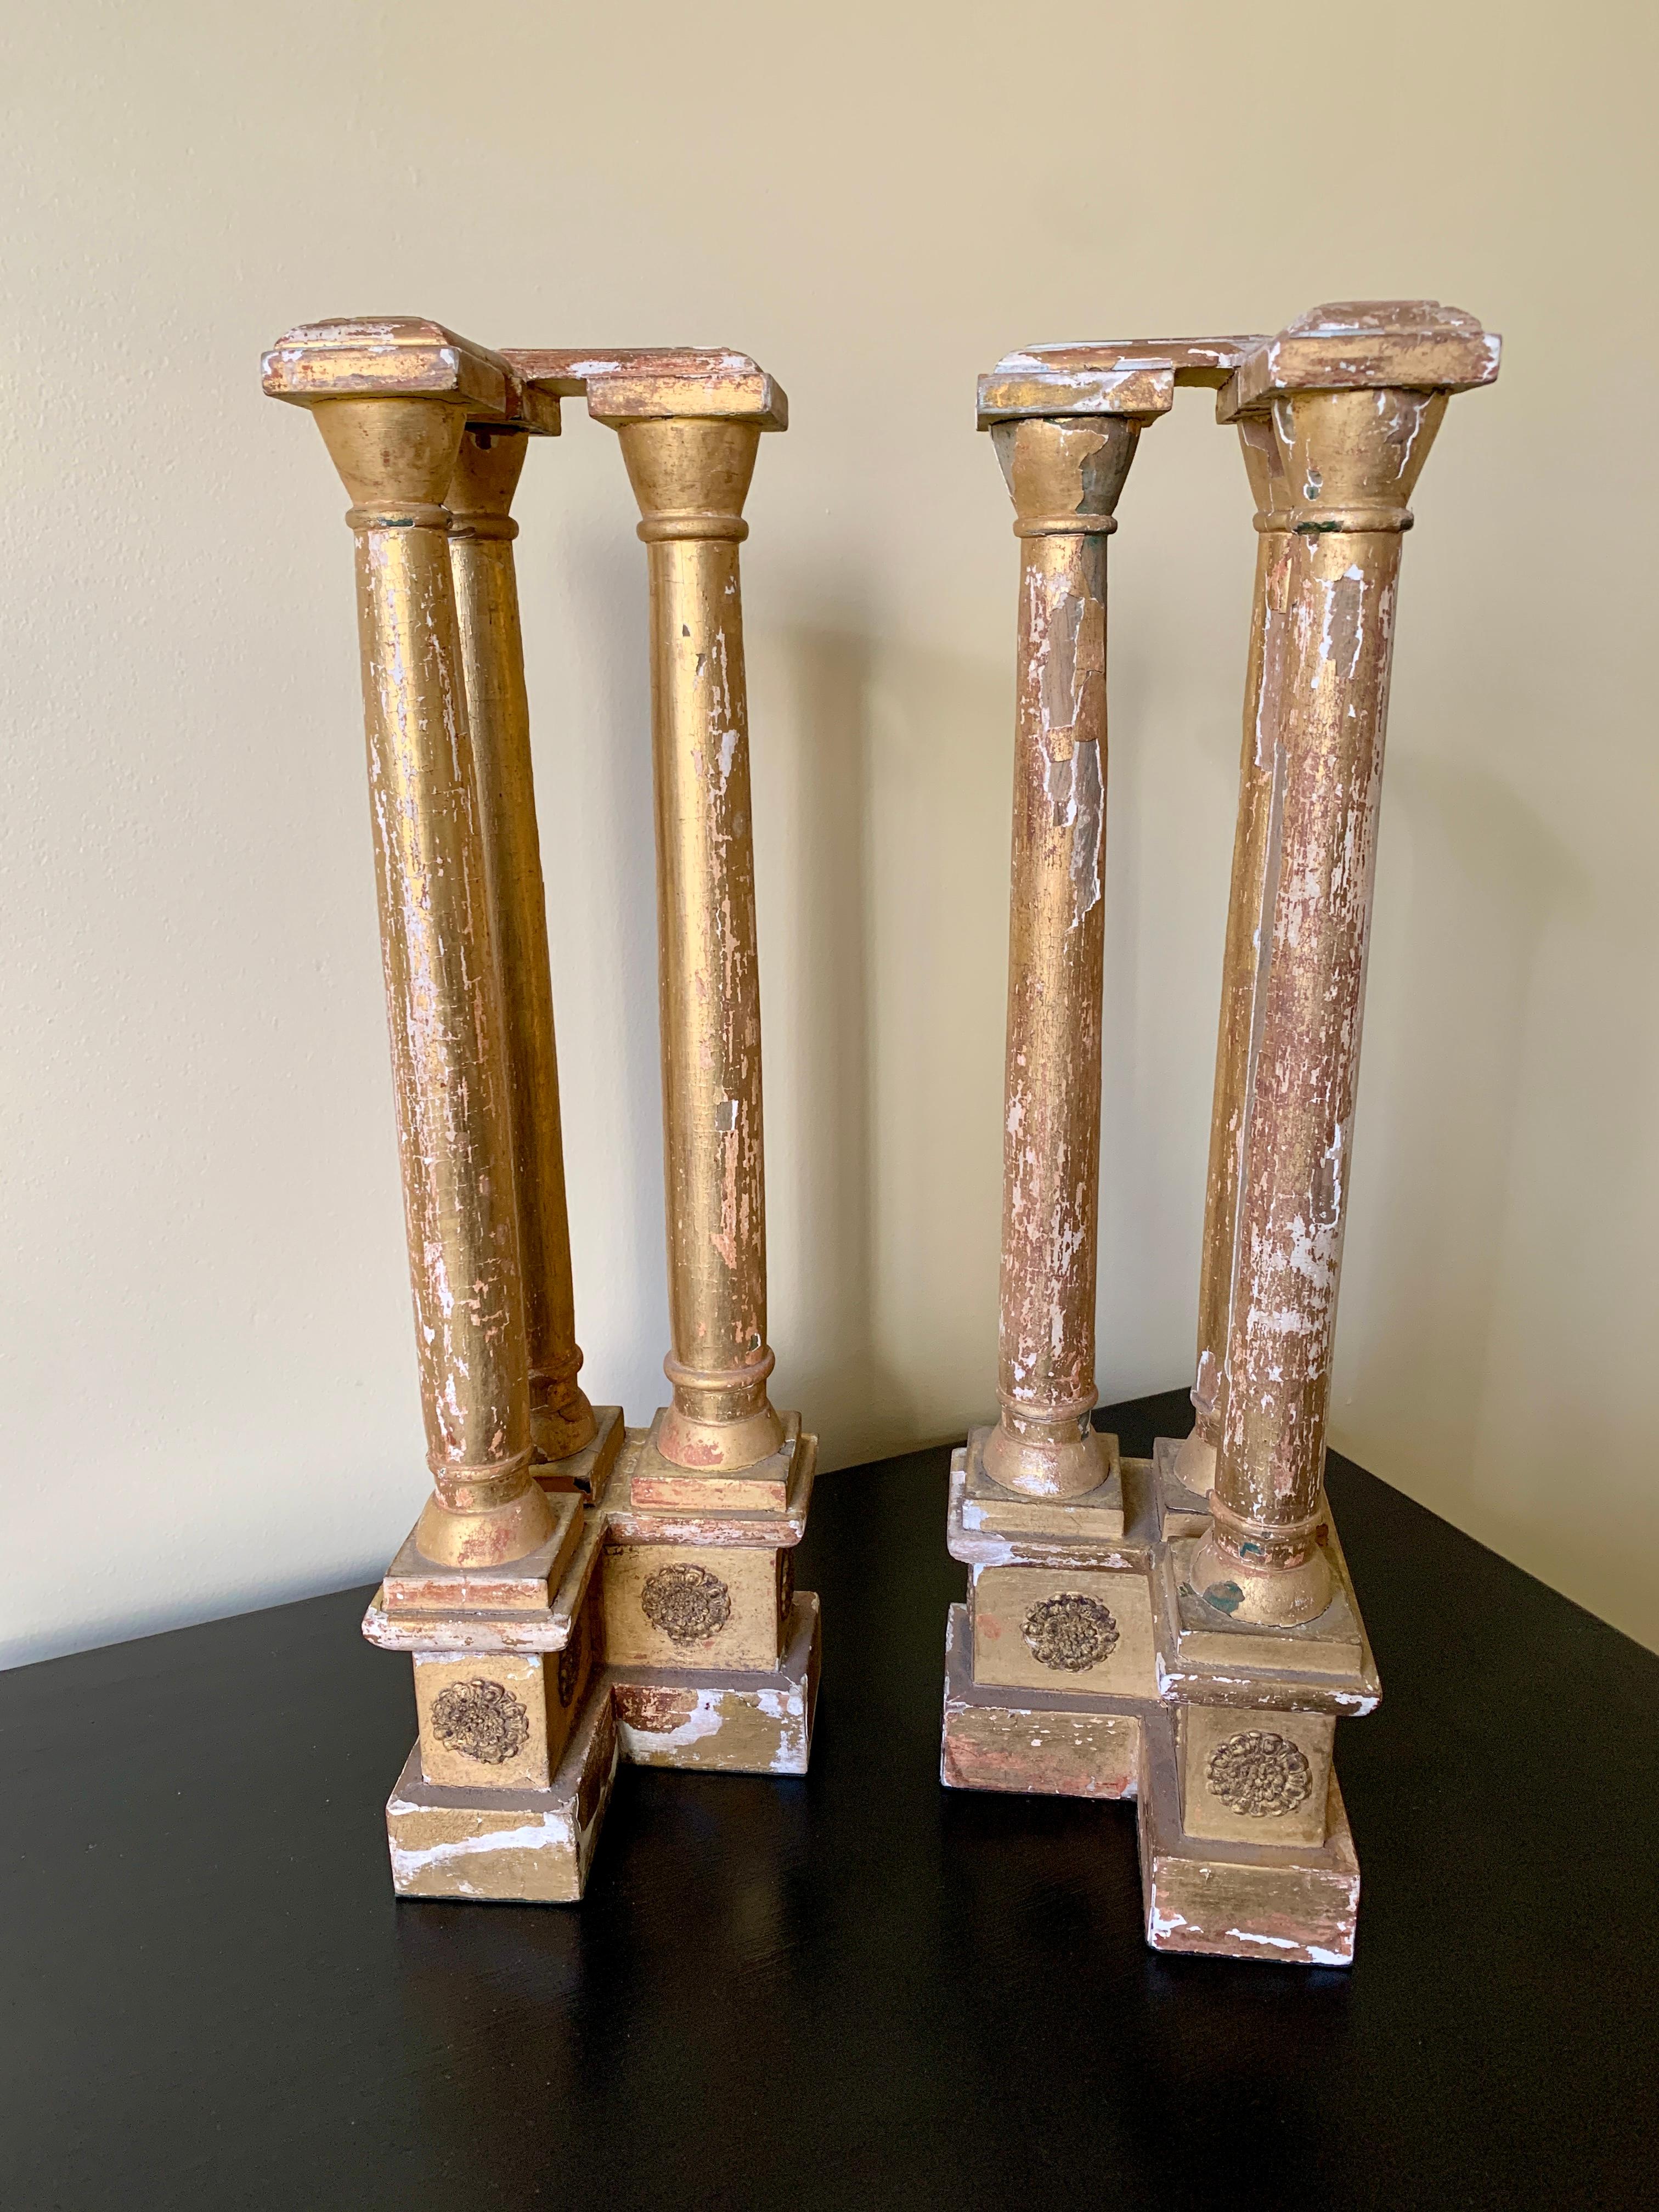 Italian Antique Neoclassical Grand Tour Giltwood Architectural Columns, a Pair For Sale